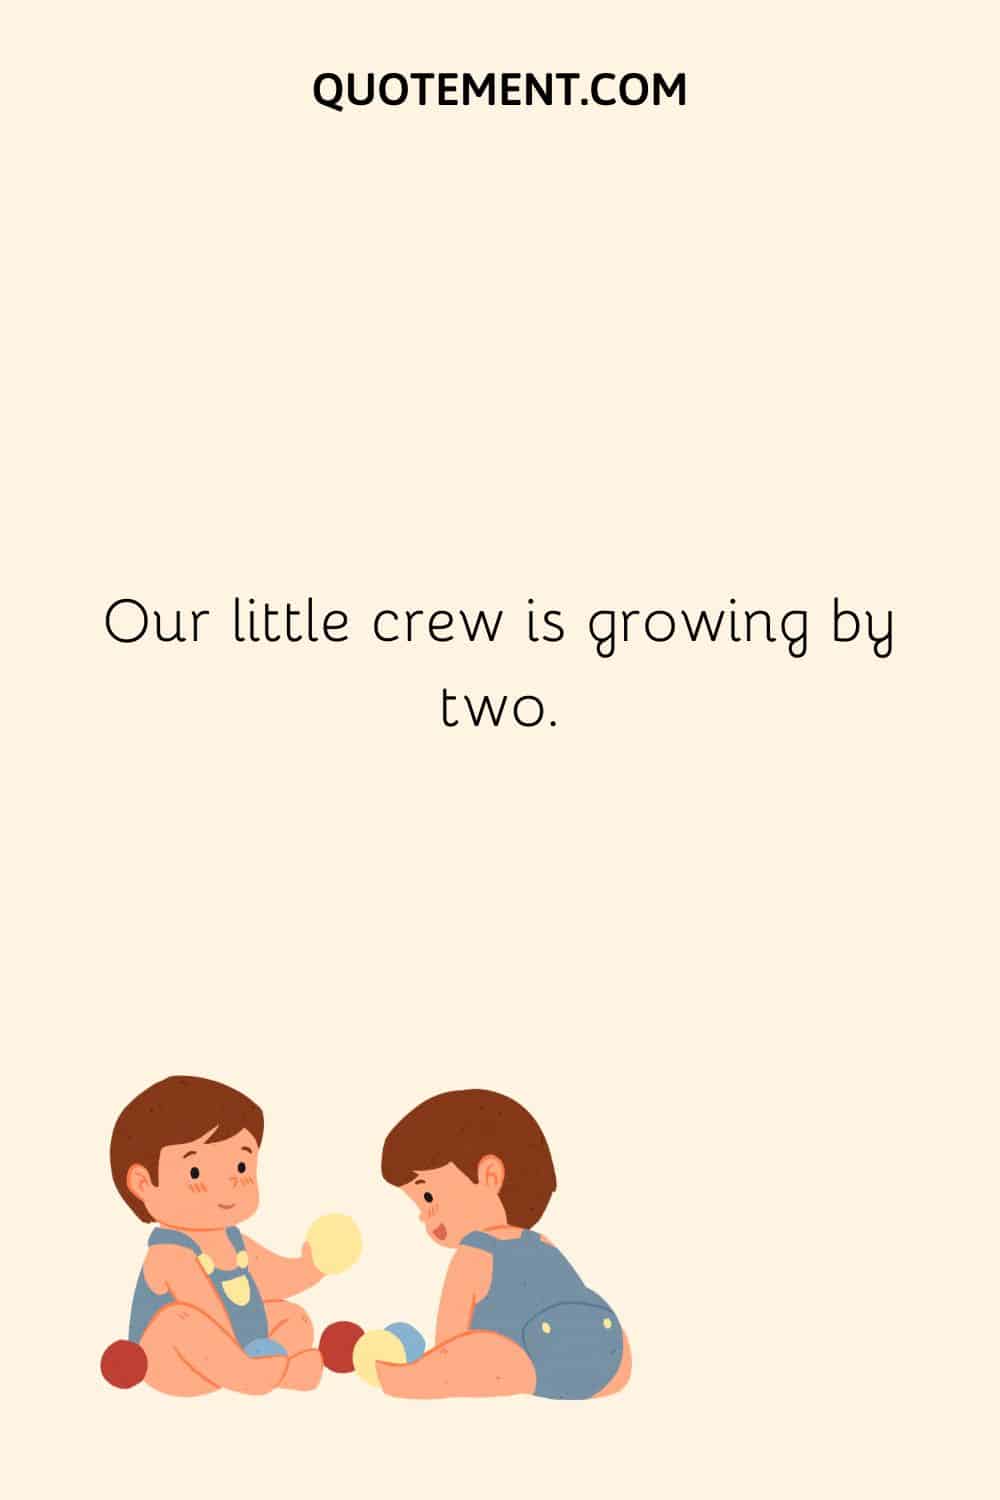 Our little crew is growing by two